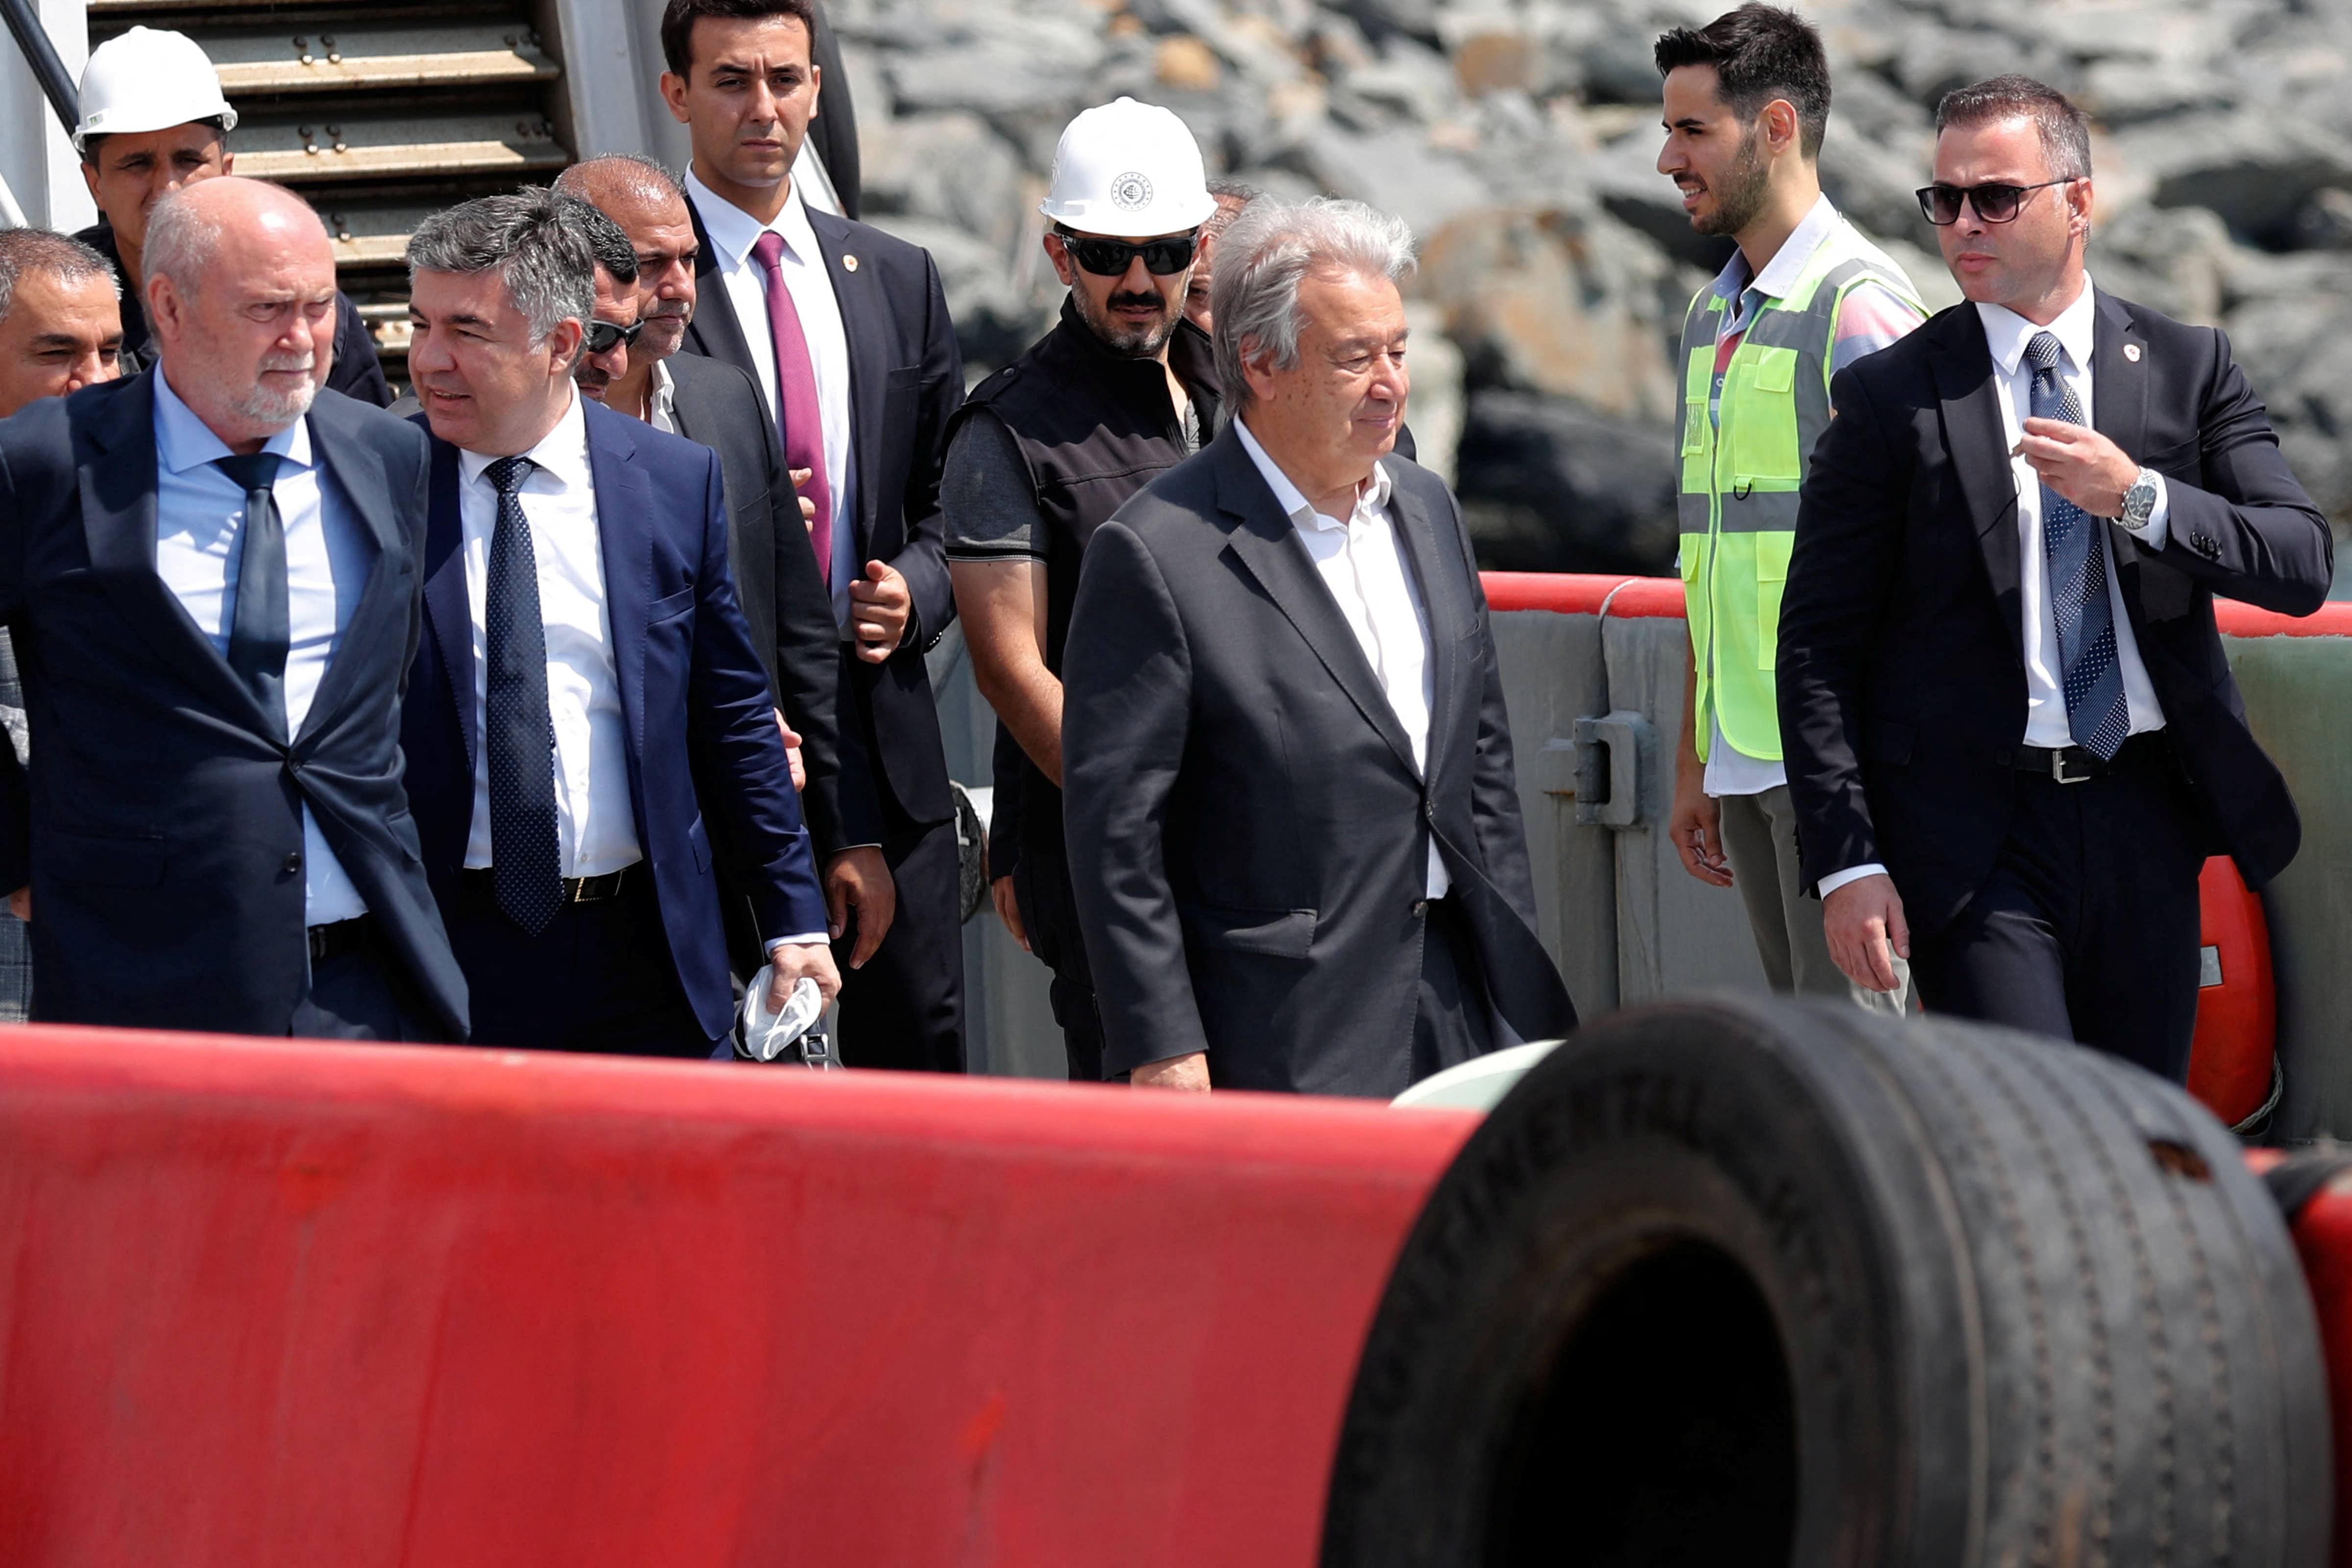 UN Secretary-General Guterres arrives on a boat to sail a Ukrainian grain-carrying vessel in Istanbul